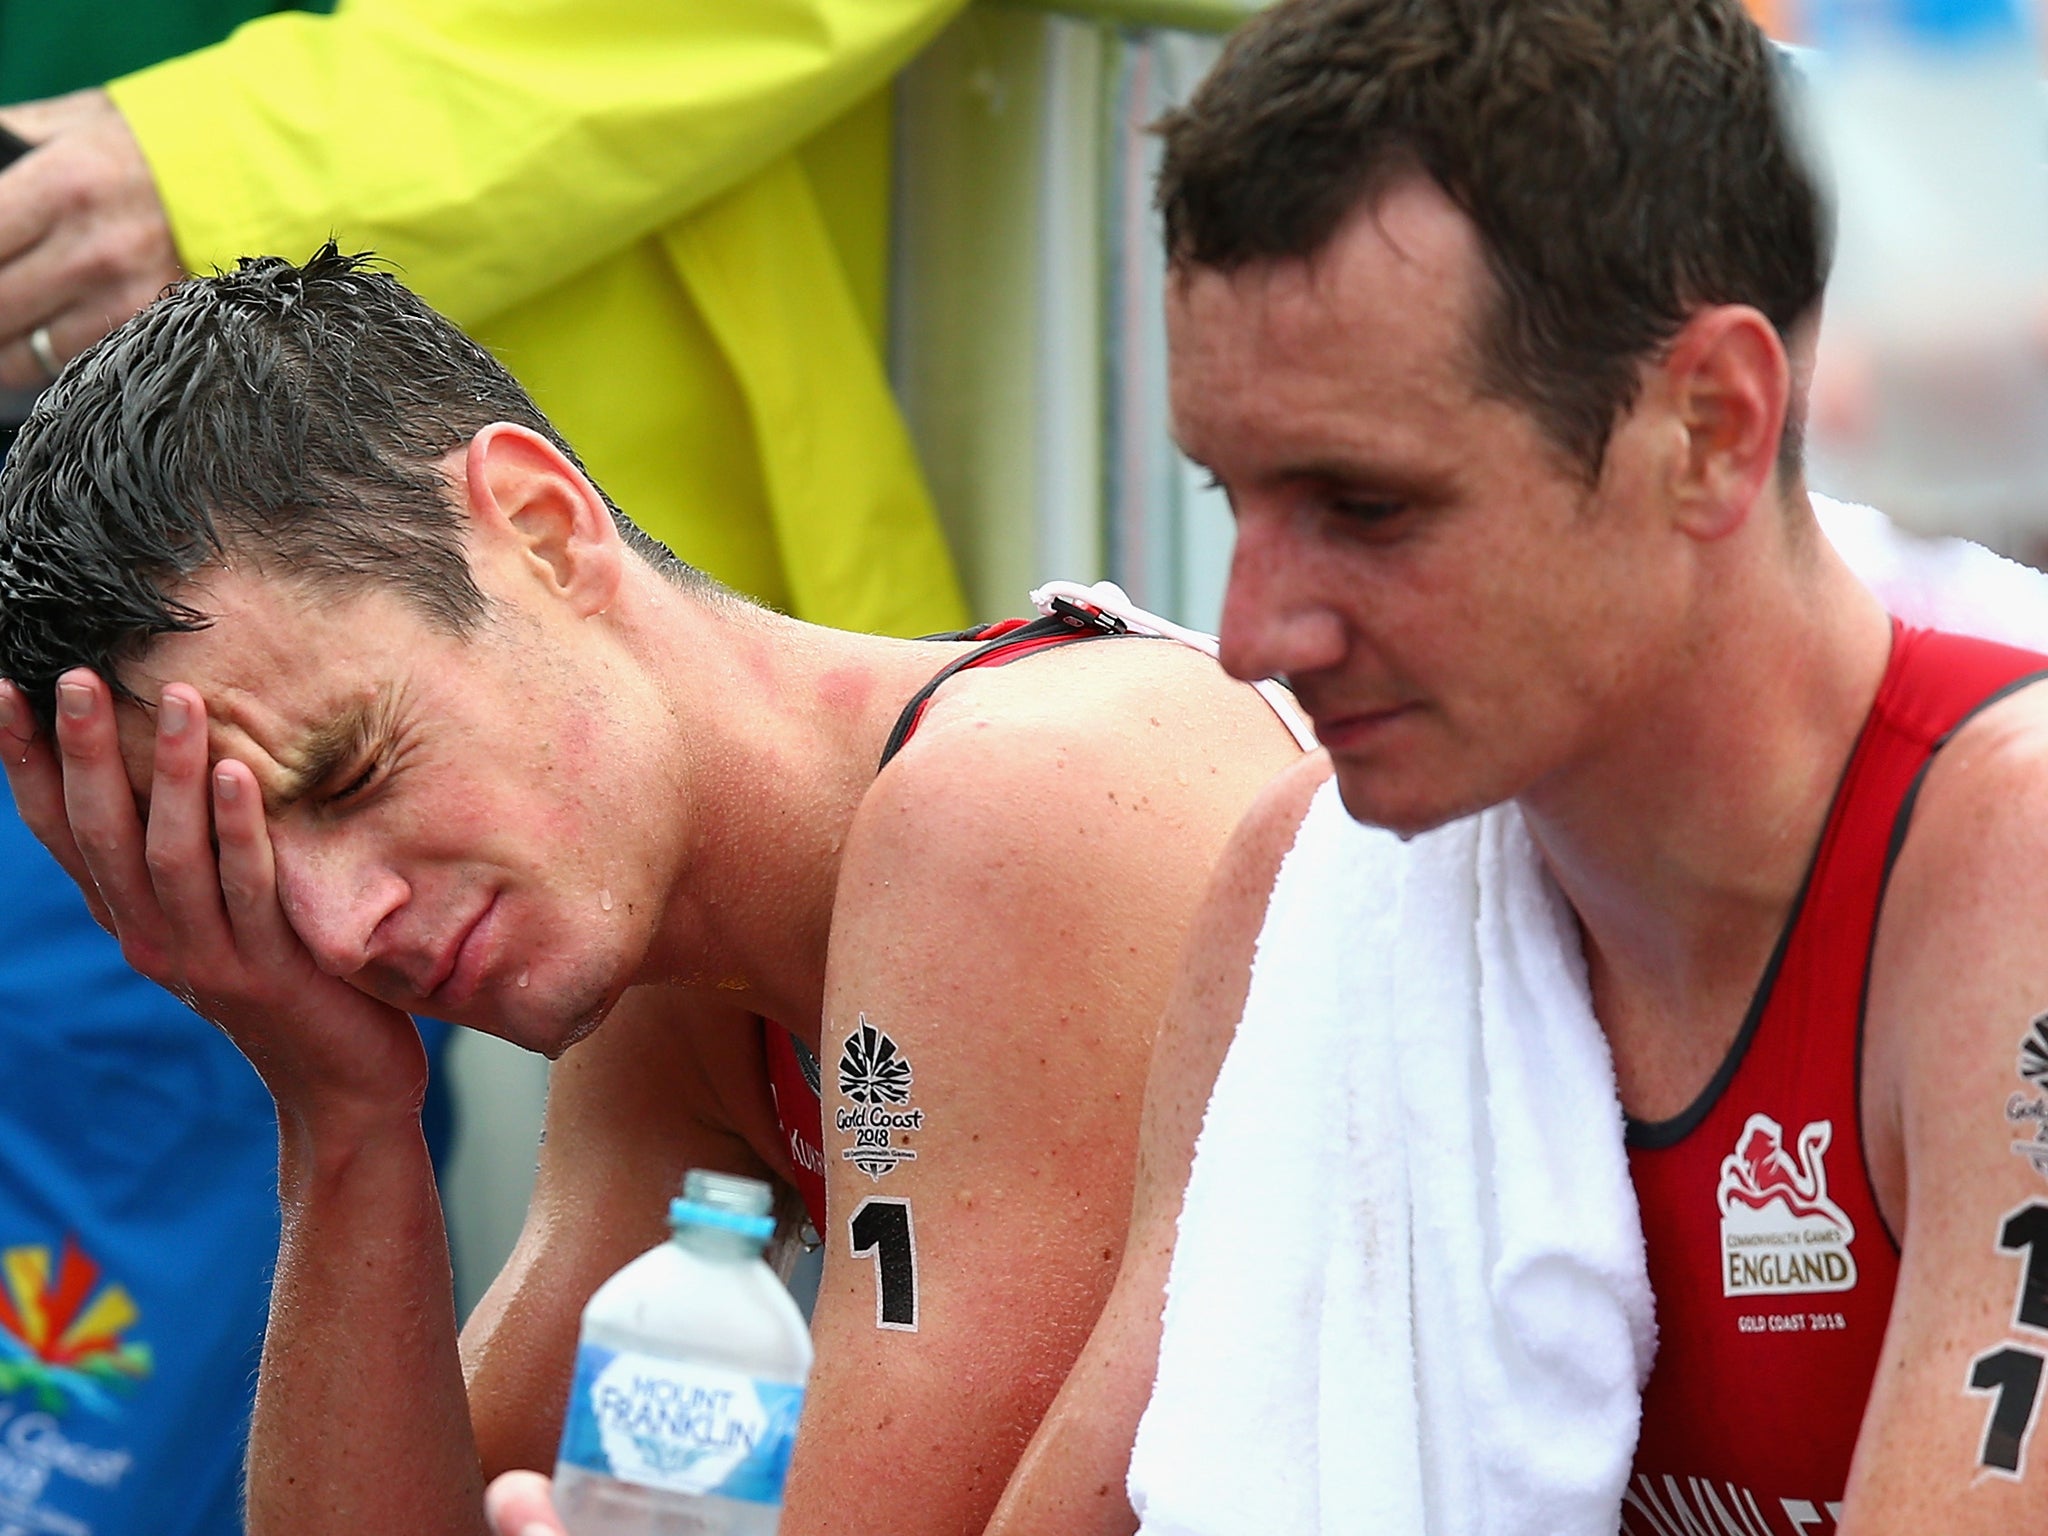 Jonny and Alistair Brownlee failed to finish in the medal positions in the men's triathlon